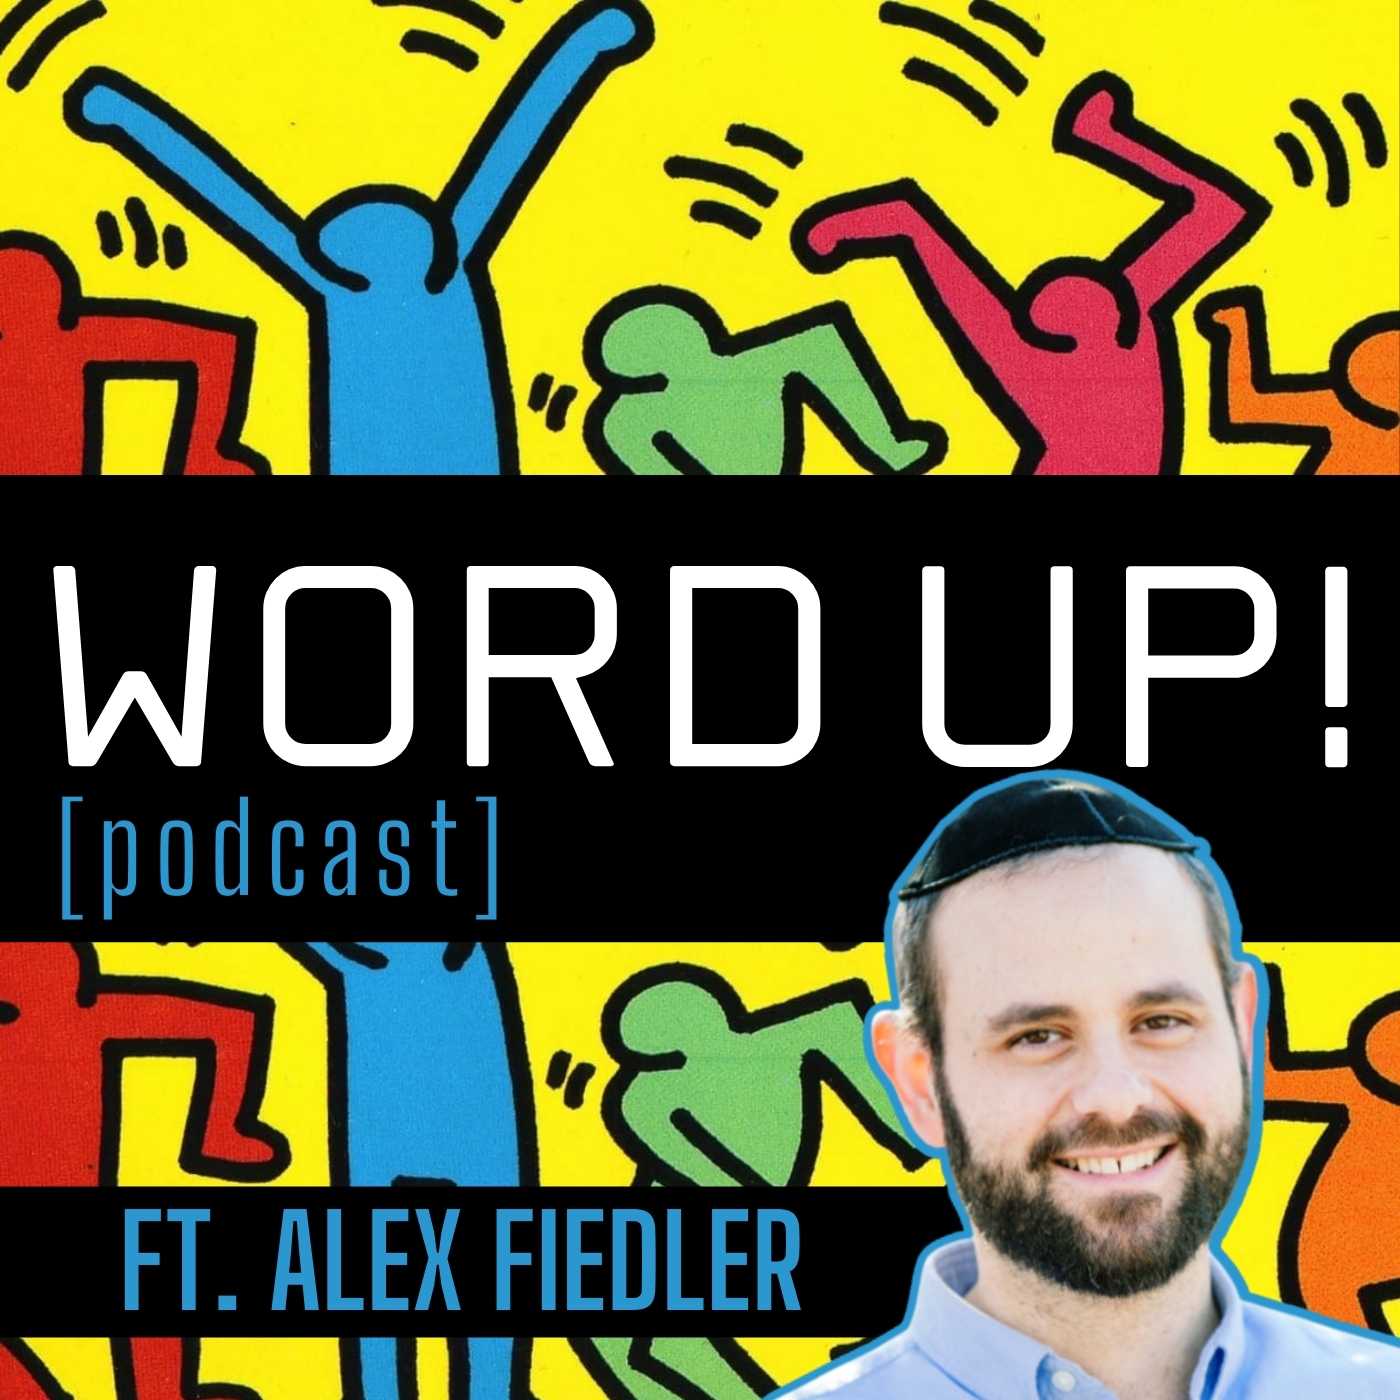 Artwork for WORD UP!